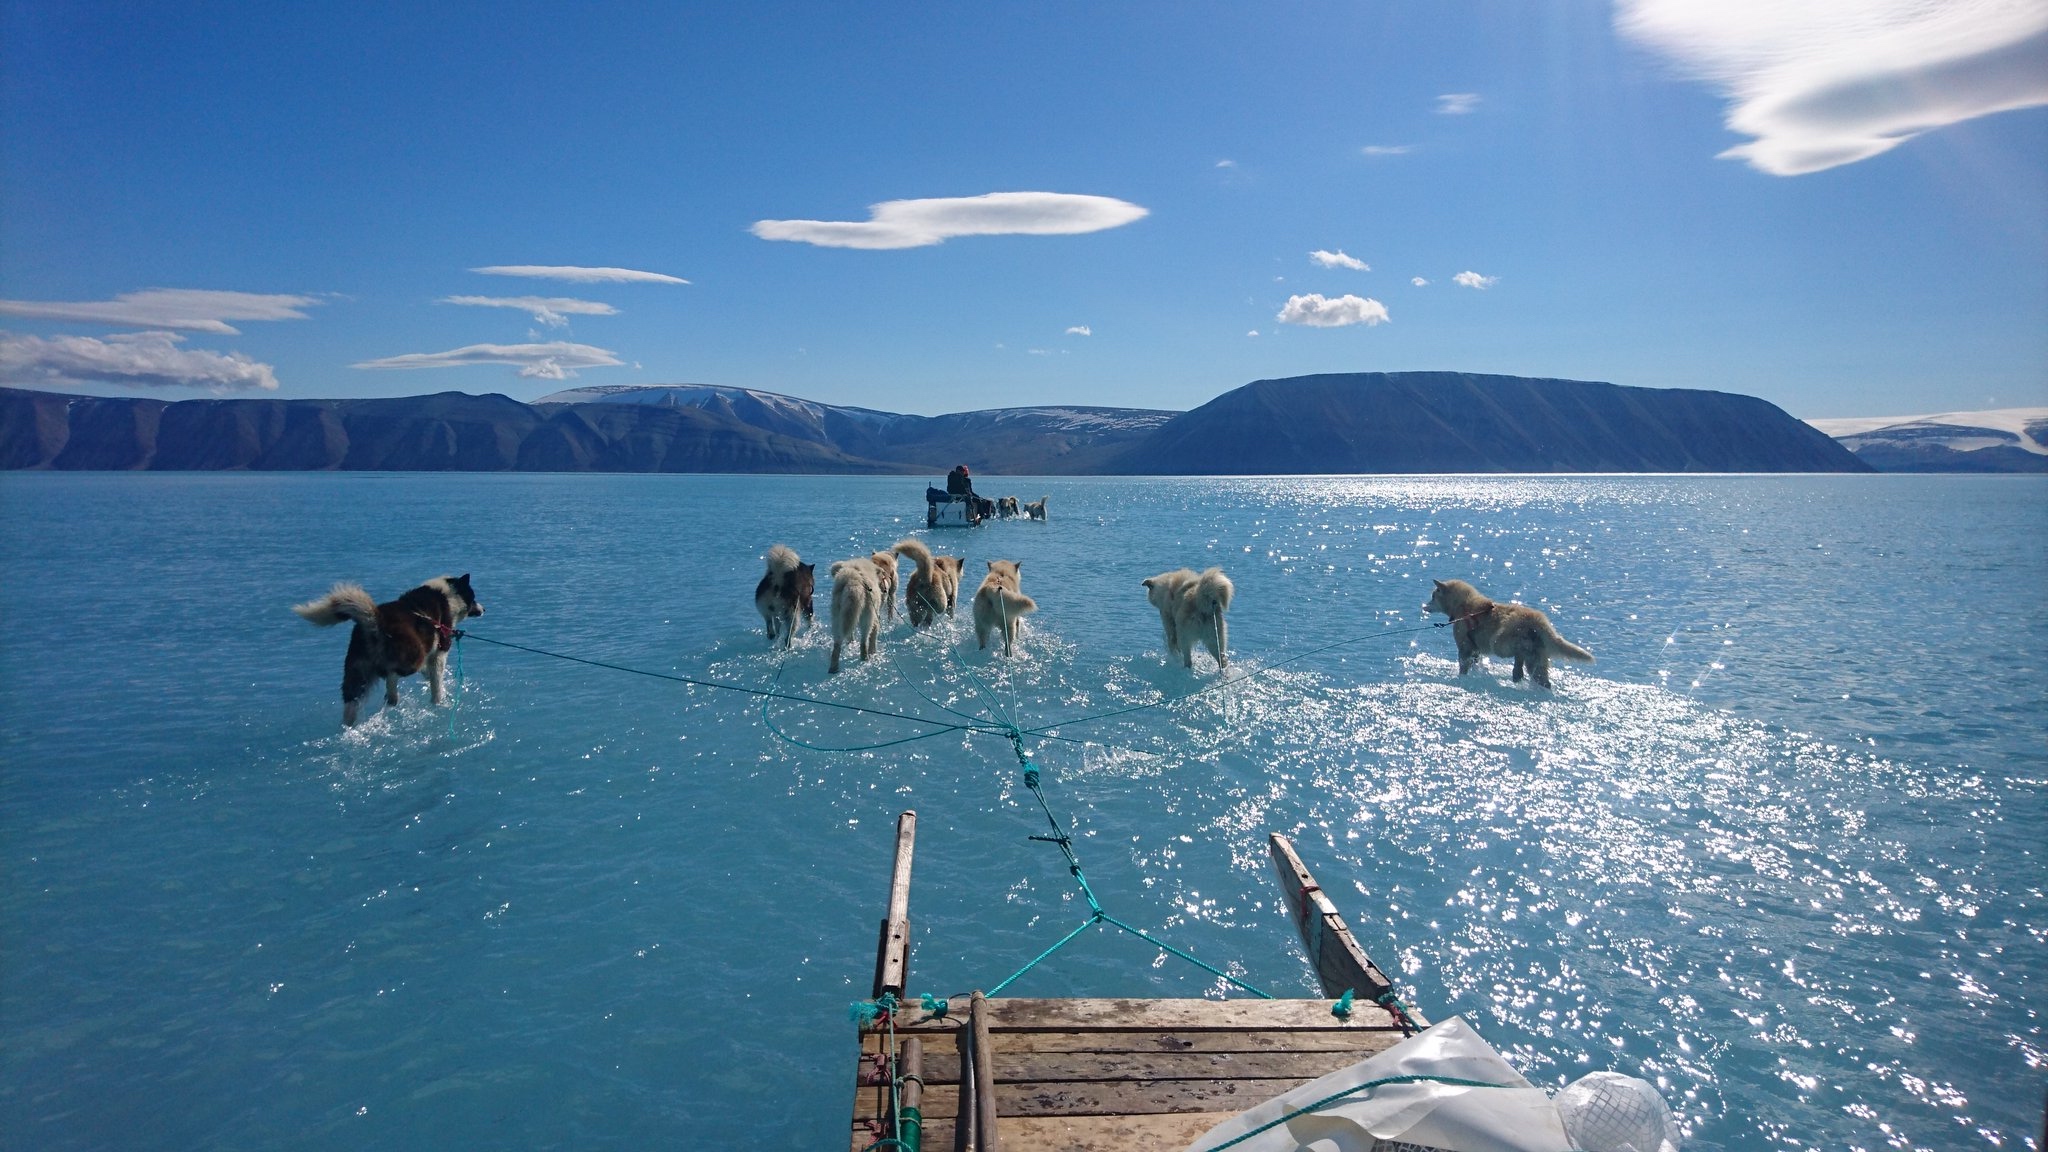 Sled dogs pull a sled through water because all the ice has melted. Greenland